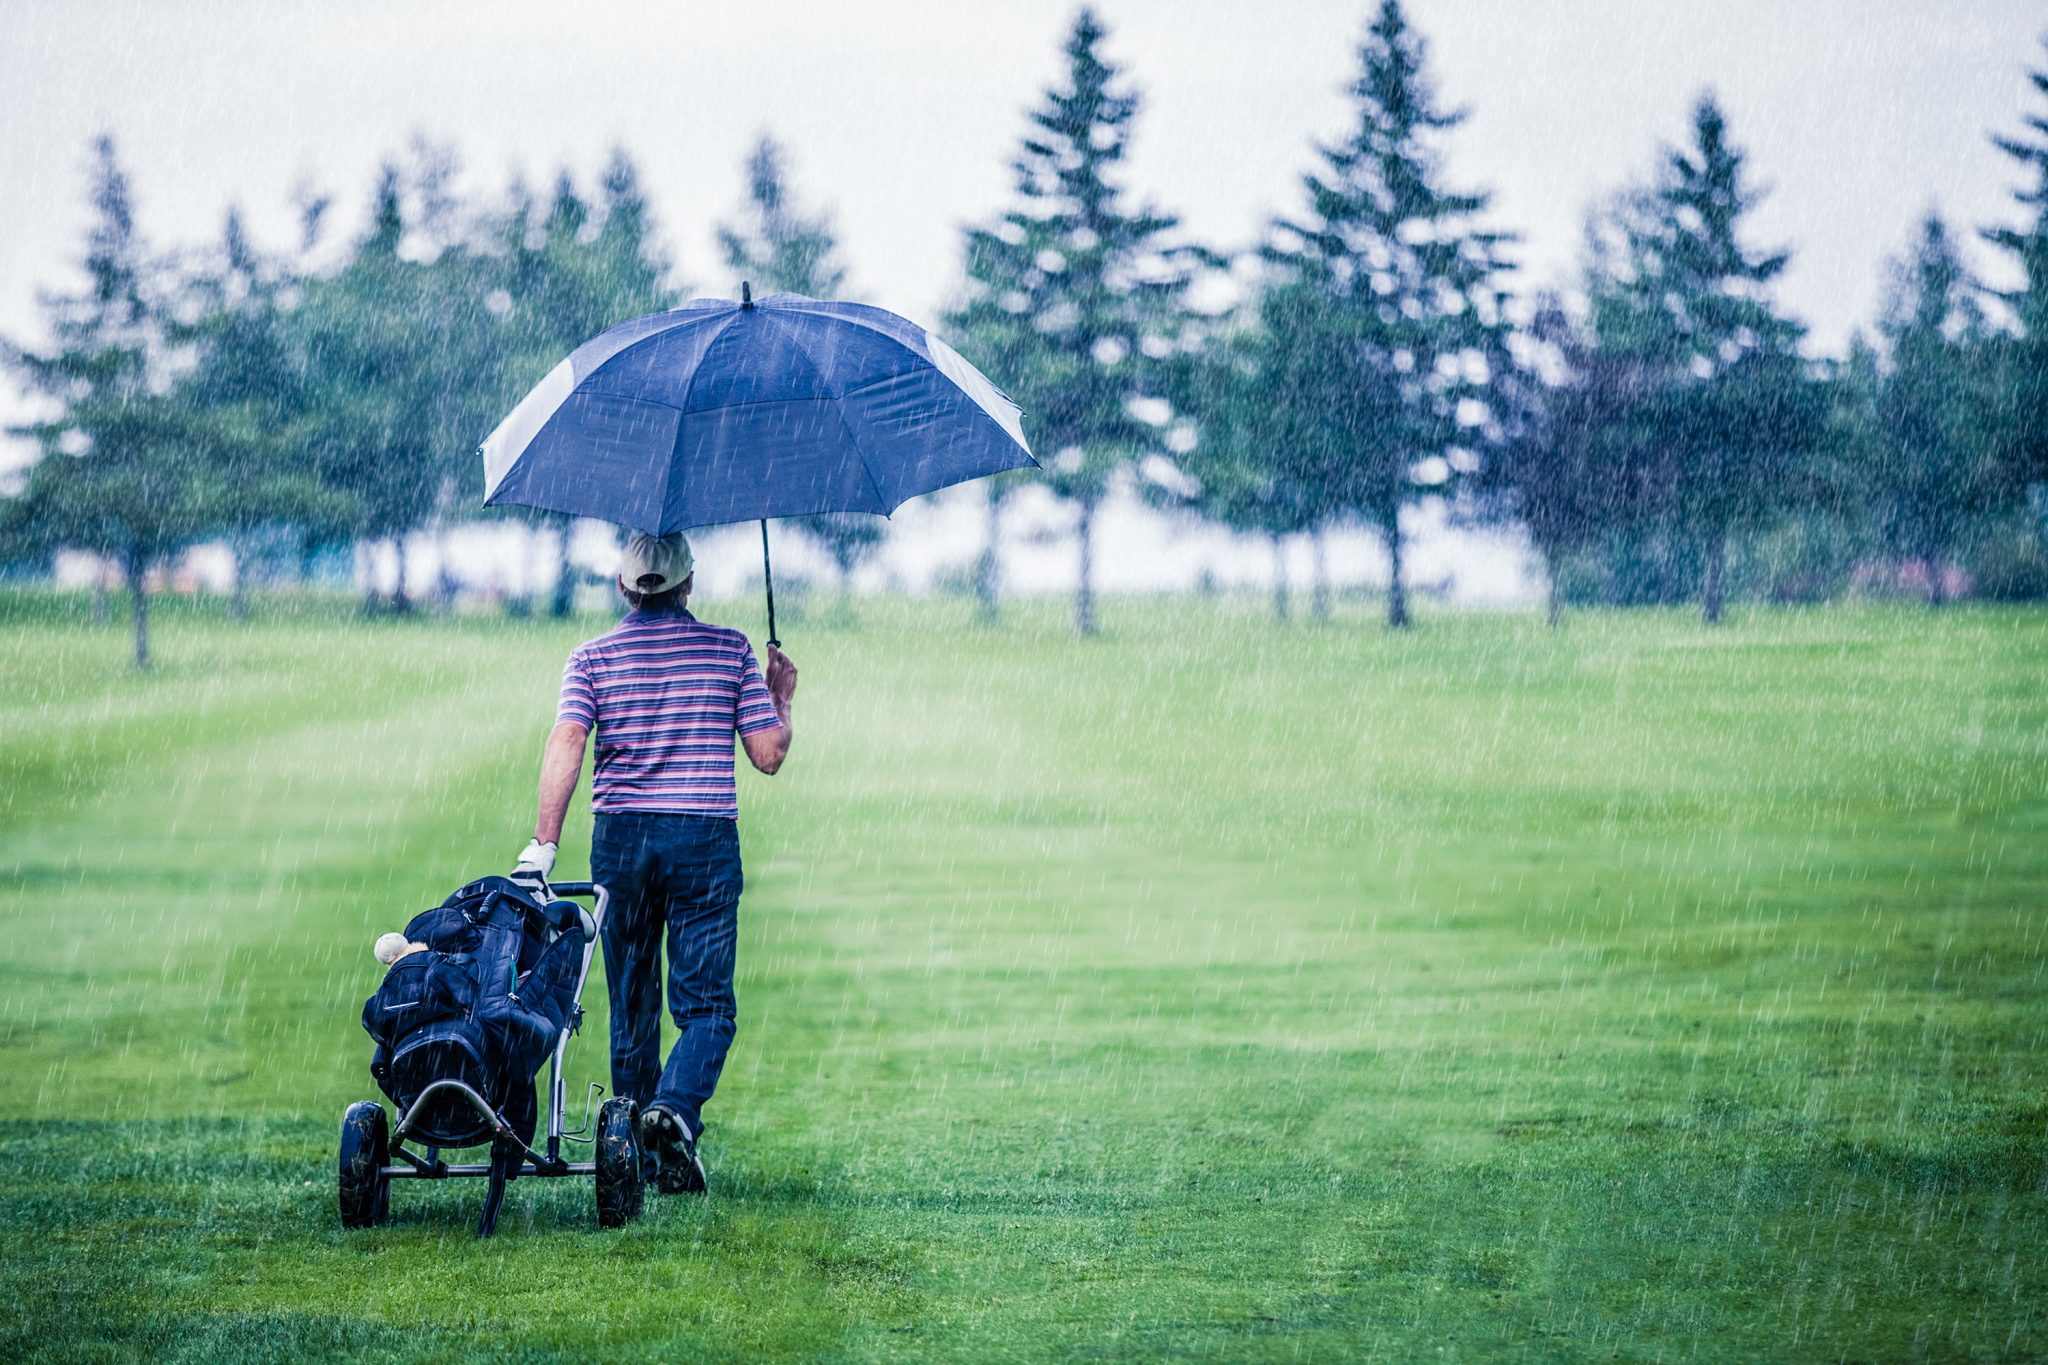 Looking for the rain. Гольф в пасмурную погоду. Sunny Days with Umbrella with people. They're playing Golf in the Rain funny picture for Kids.